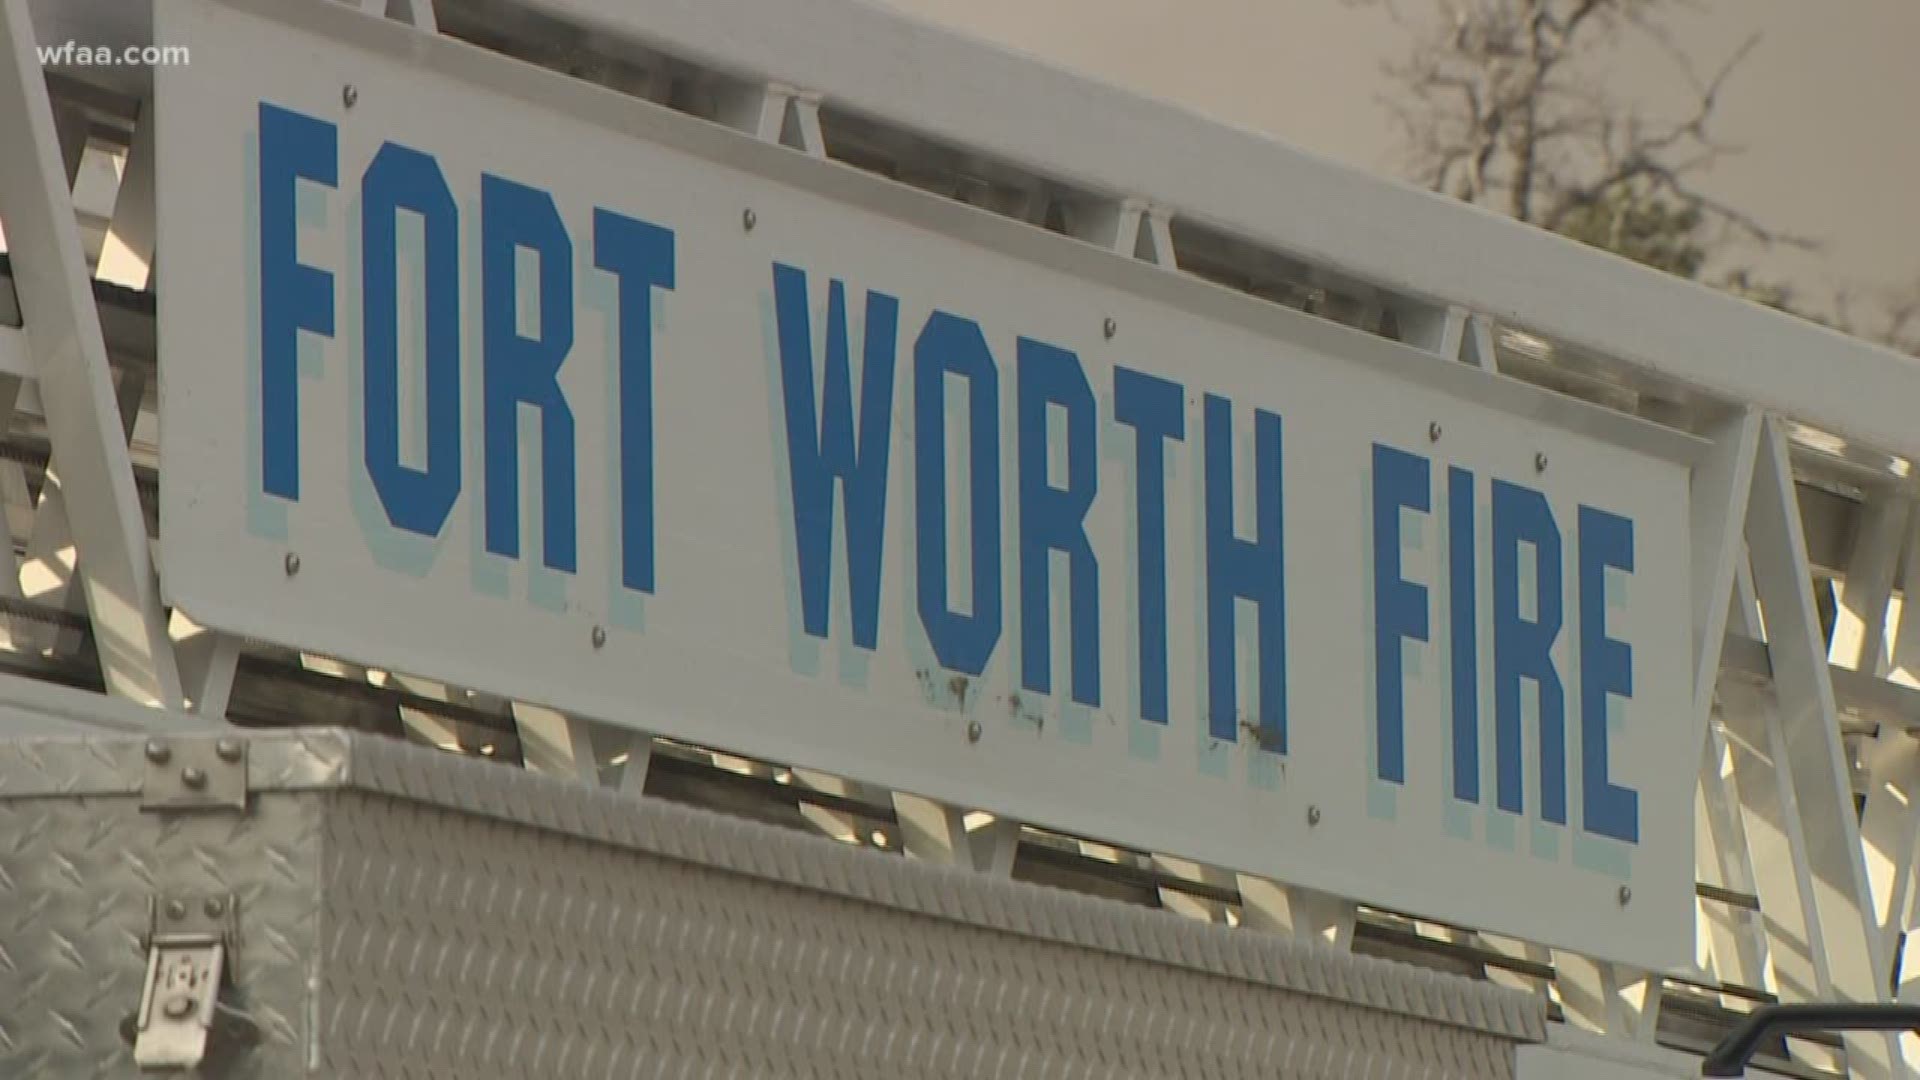 A former Fort Worth firefighter says she was forced into an early medical retirement after reporting multiple incidents of sexual harassment and three assaults.